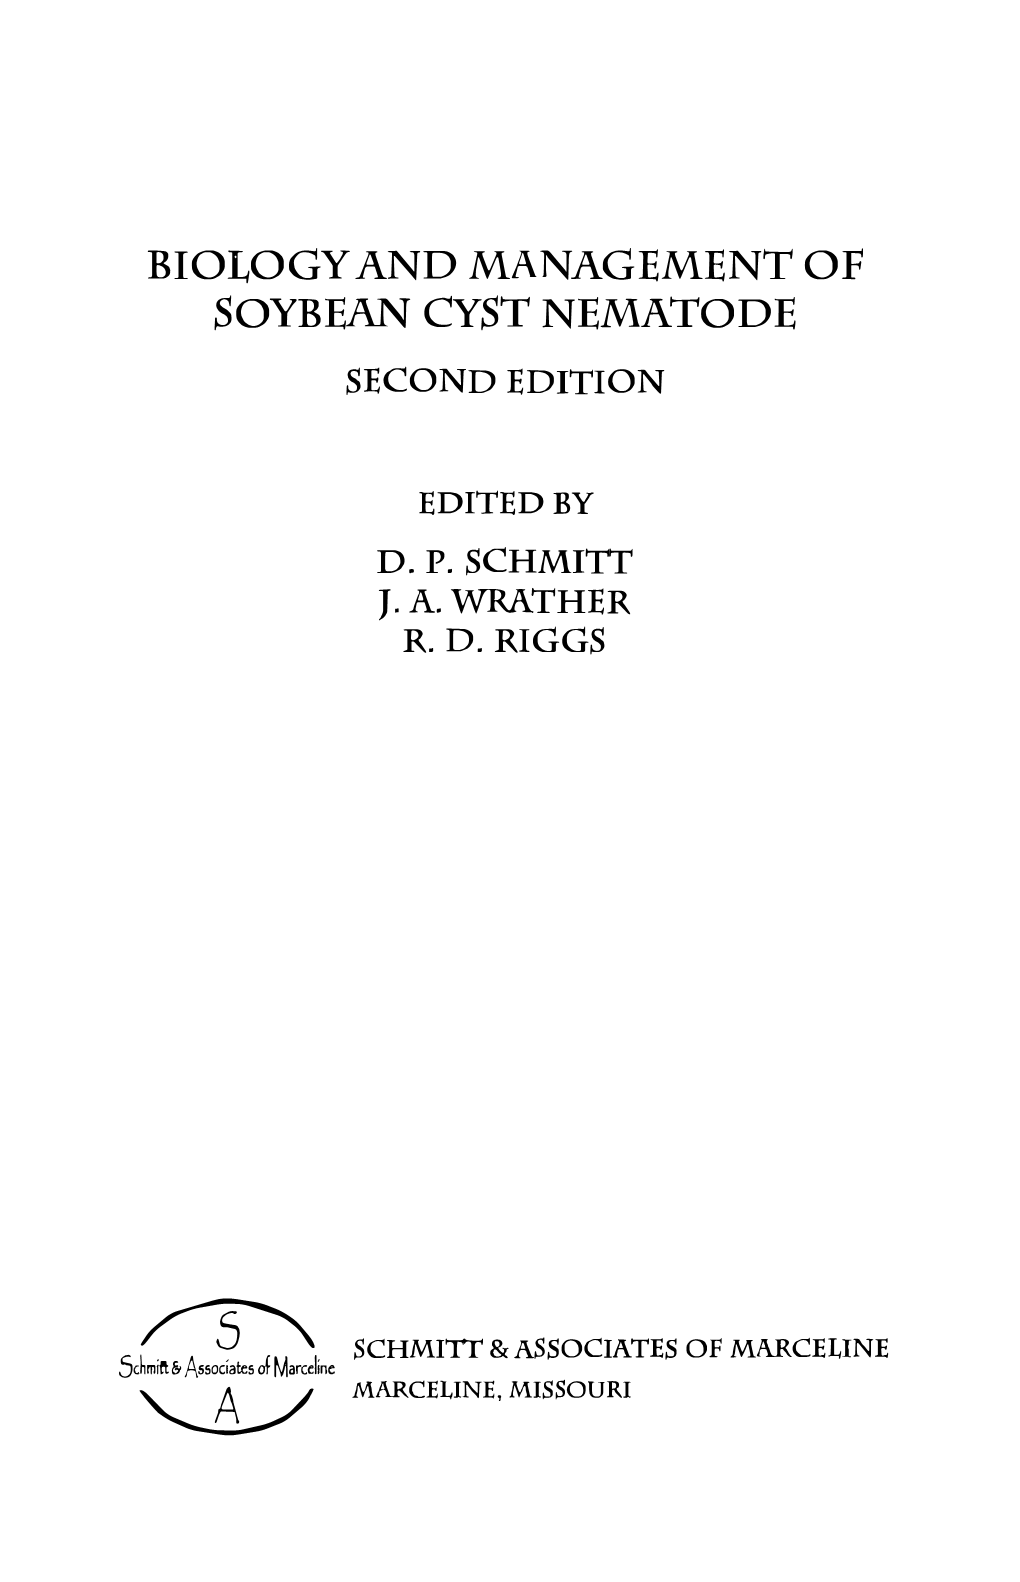 Biology and Management of Soybean Cyst Nematode